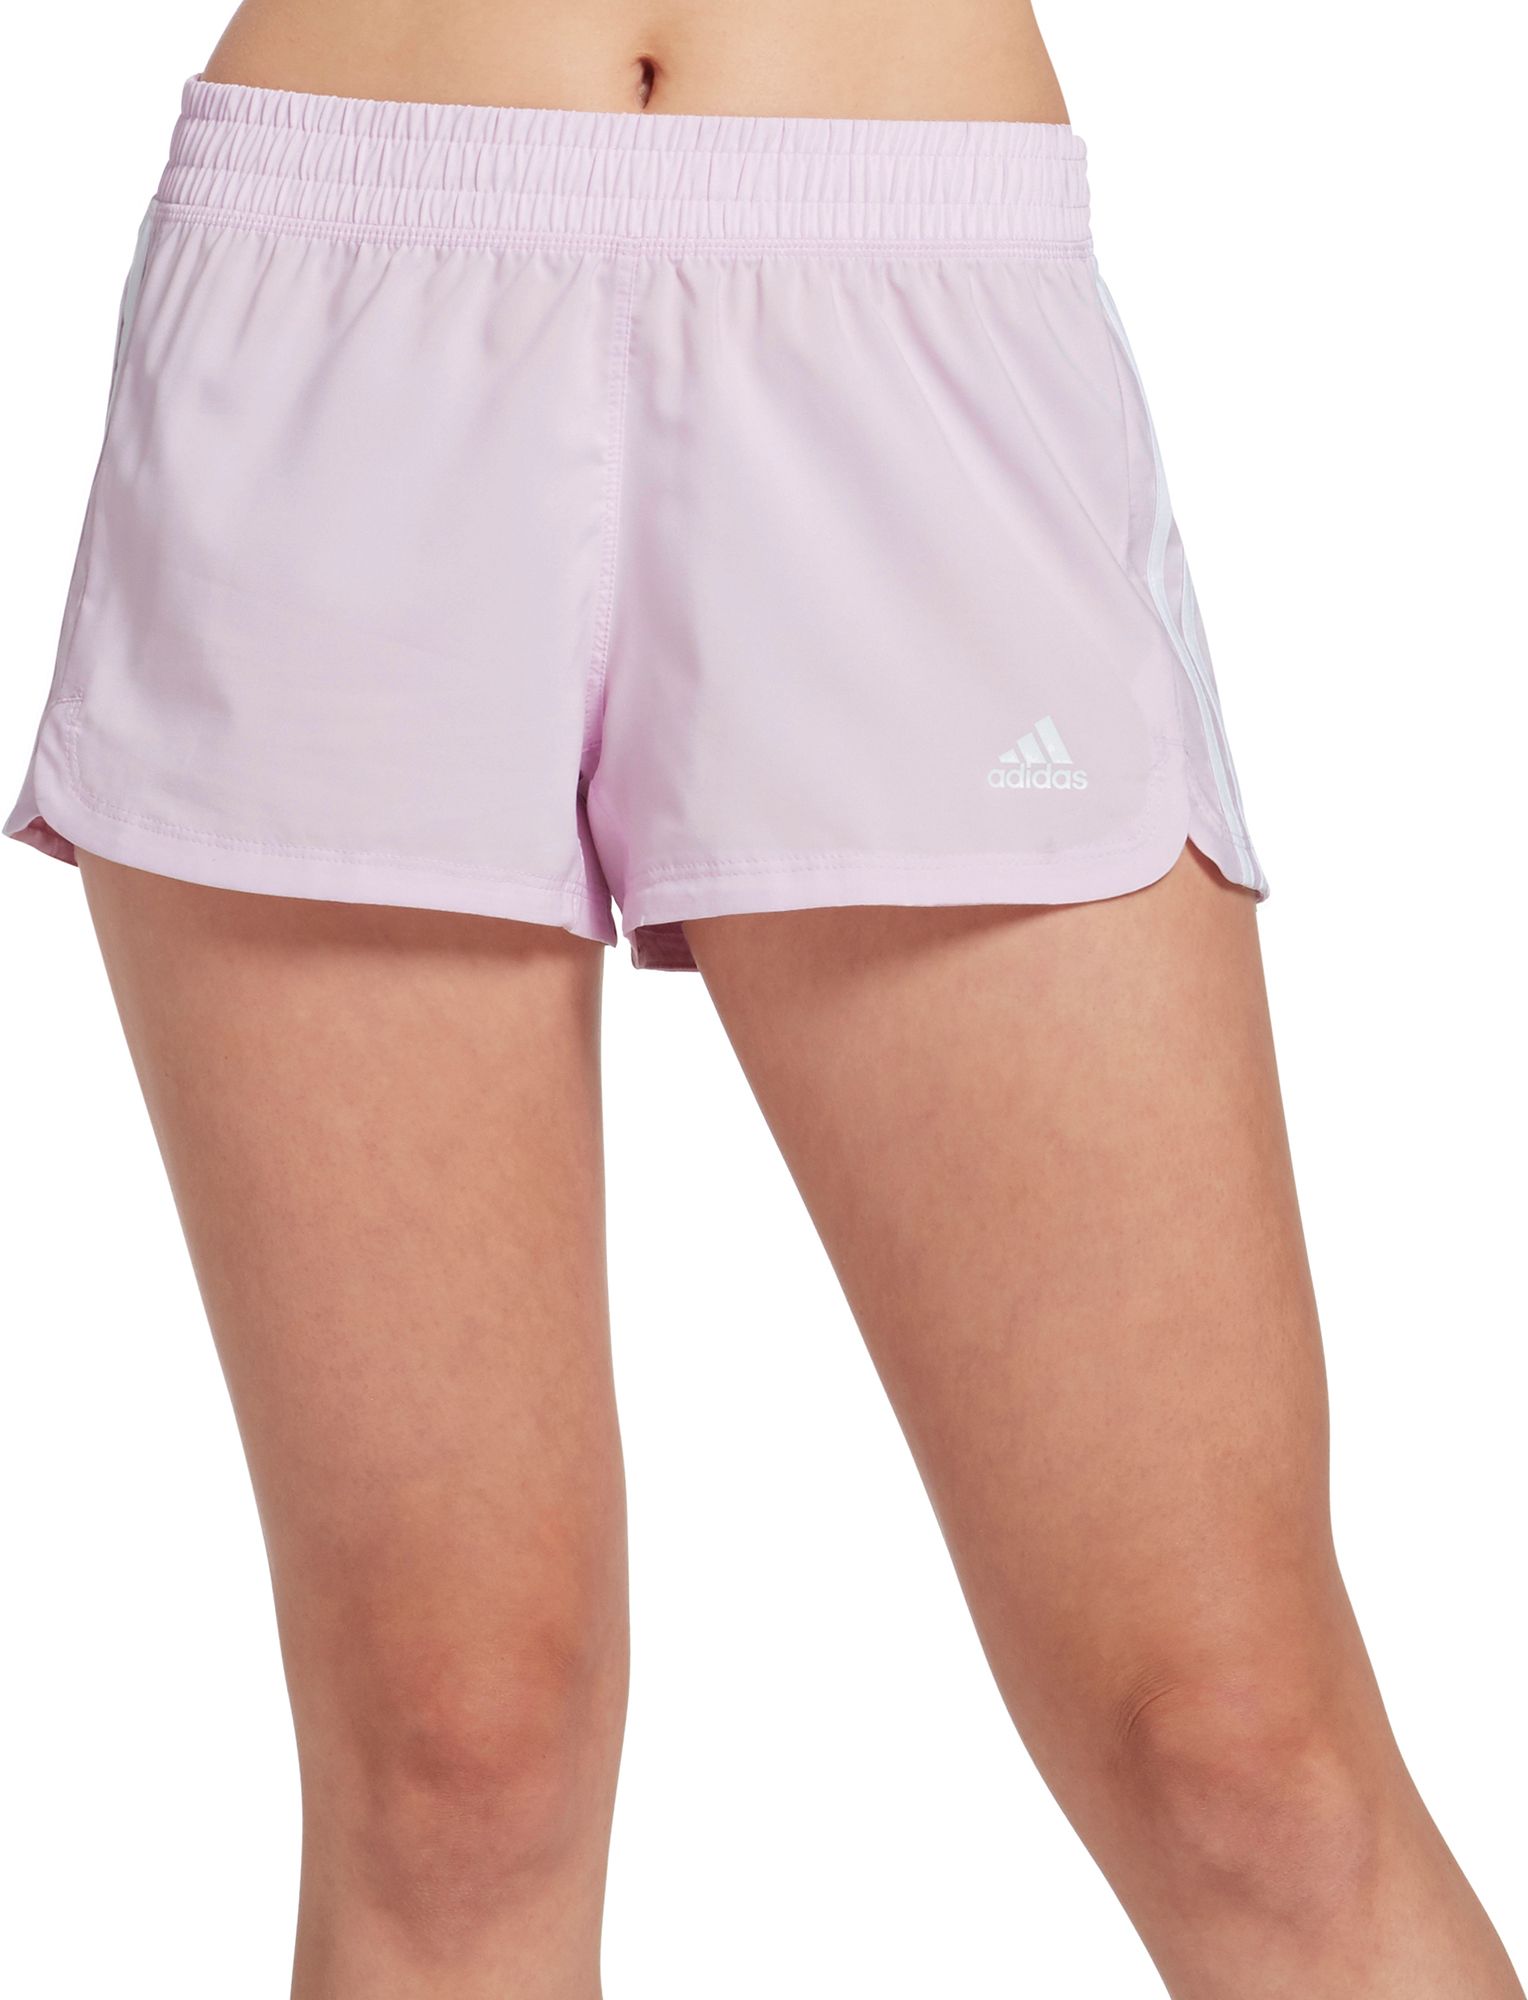 Pacer 3-Stripes Woven Shorts 